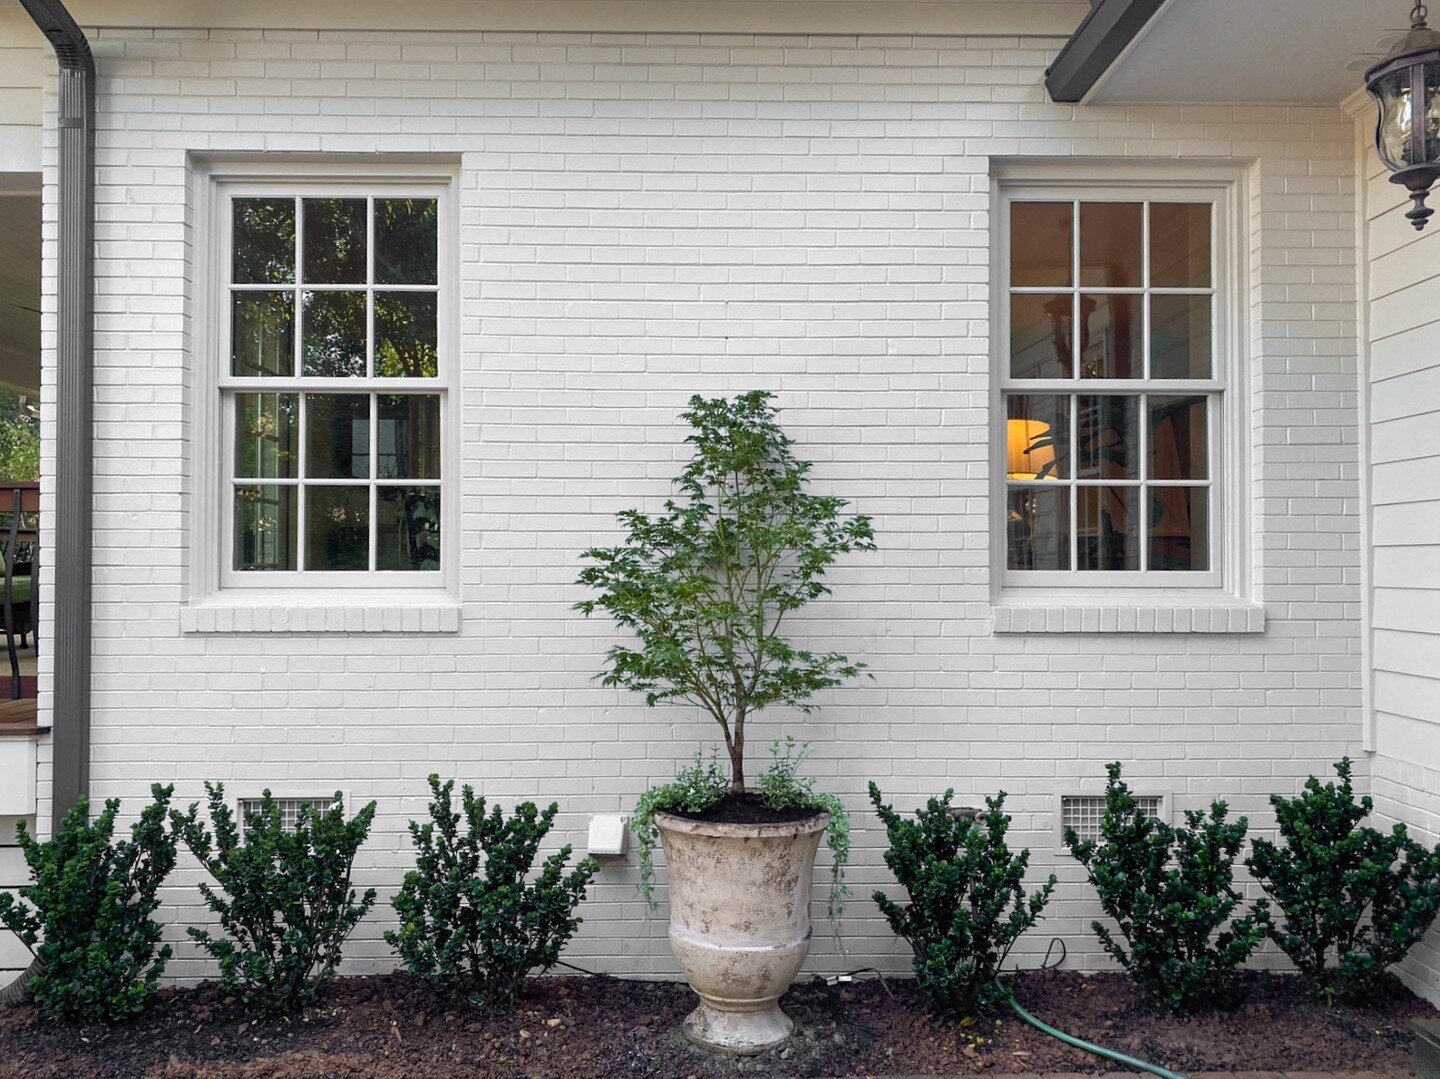 Appreciating the beauty and simplicity of a potted plant. Swipe to see the symmetry and elegance this simple change made to this portion of the project. 🪴
*
*
*
#landscapedesign #landscape #outdoors #outdoorliving #southernstyle #southernhome #charl